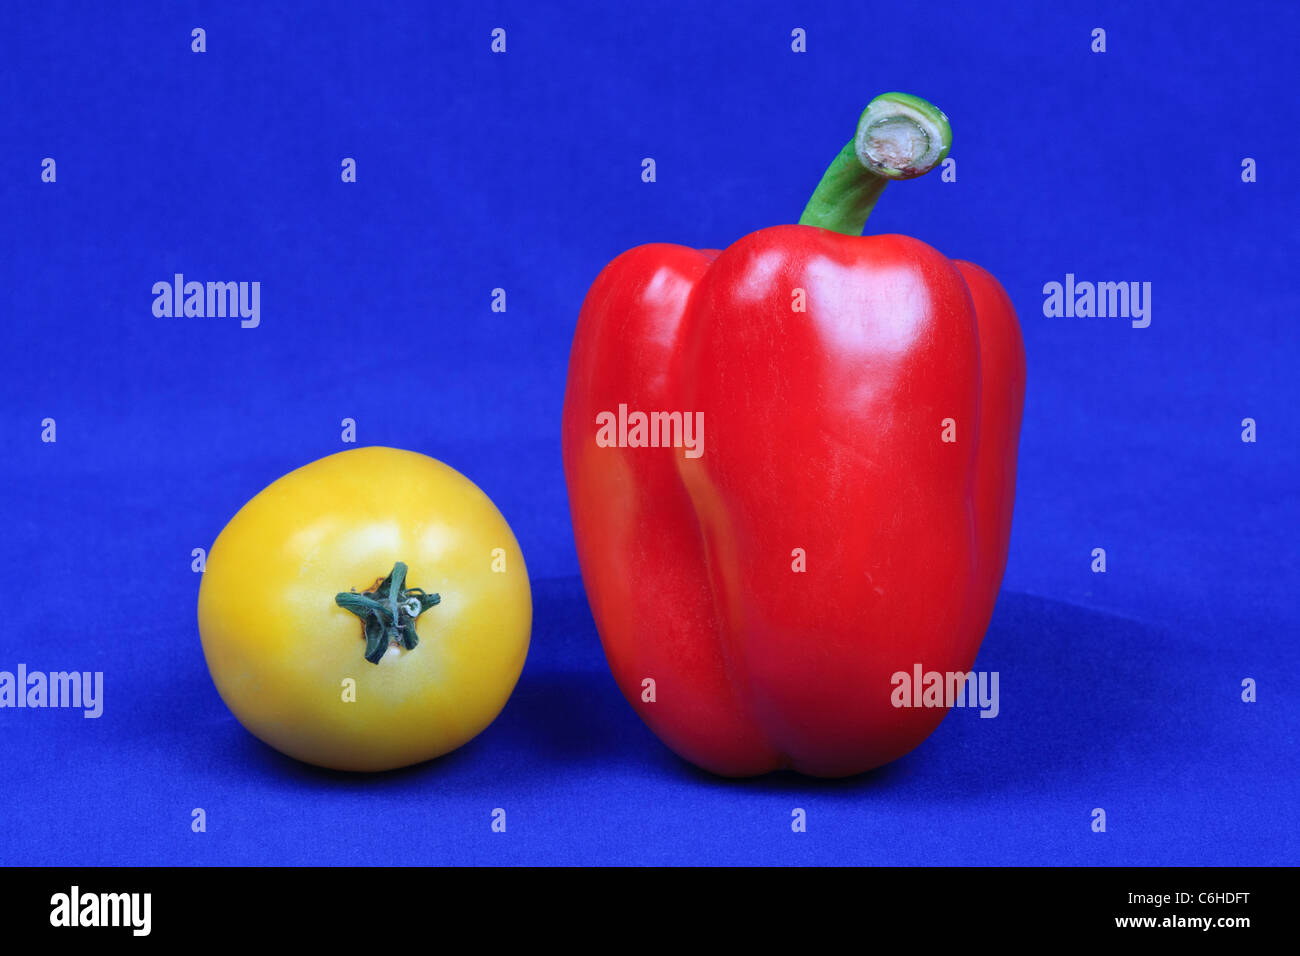 Red bell pepper and yellow heritage tomato against a blue background Stock Photo